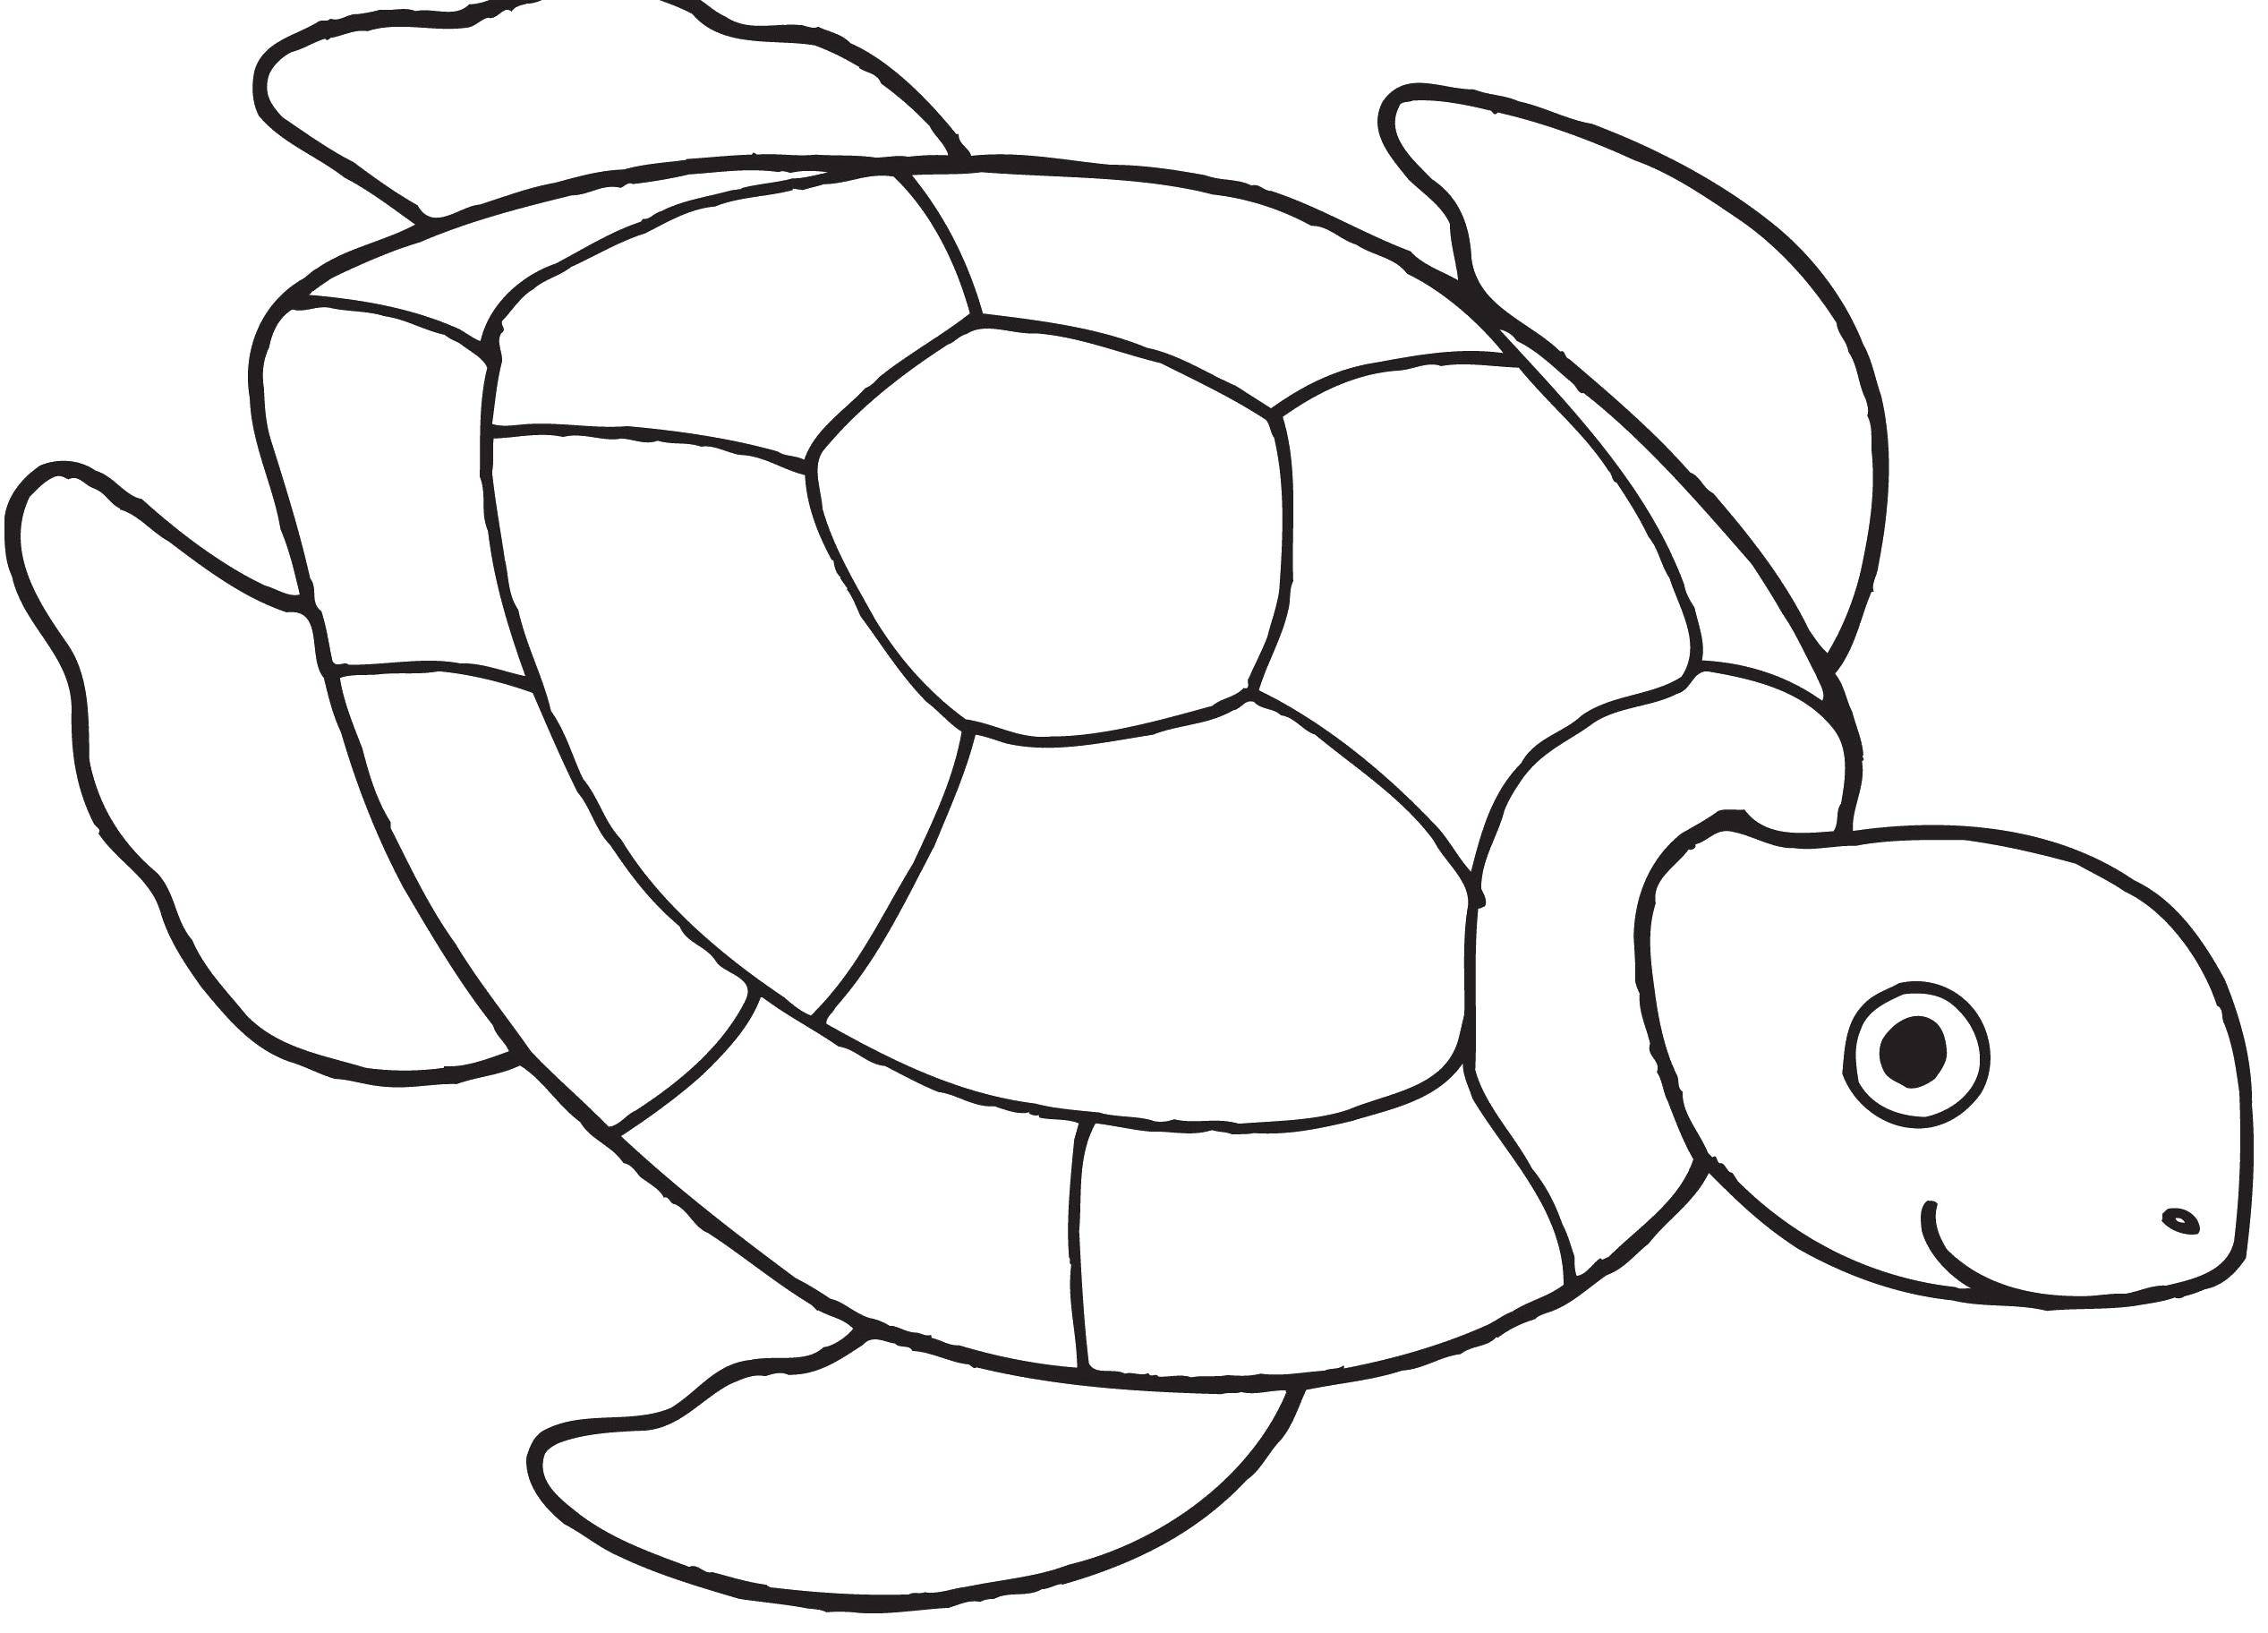 Coloring Sea turtle. Category Animals. Tags:  Animals, turtle.